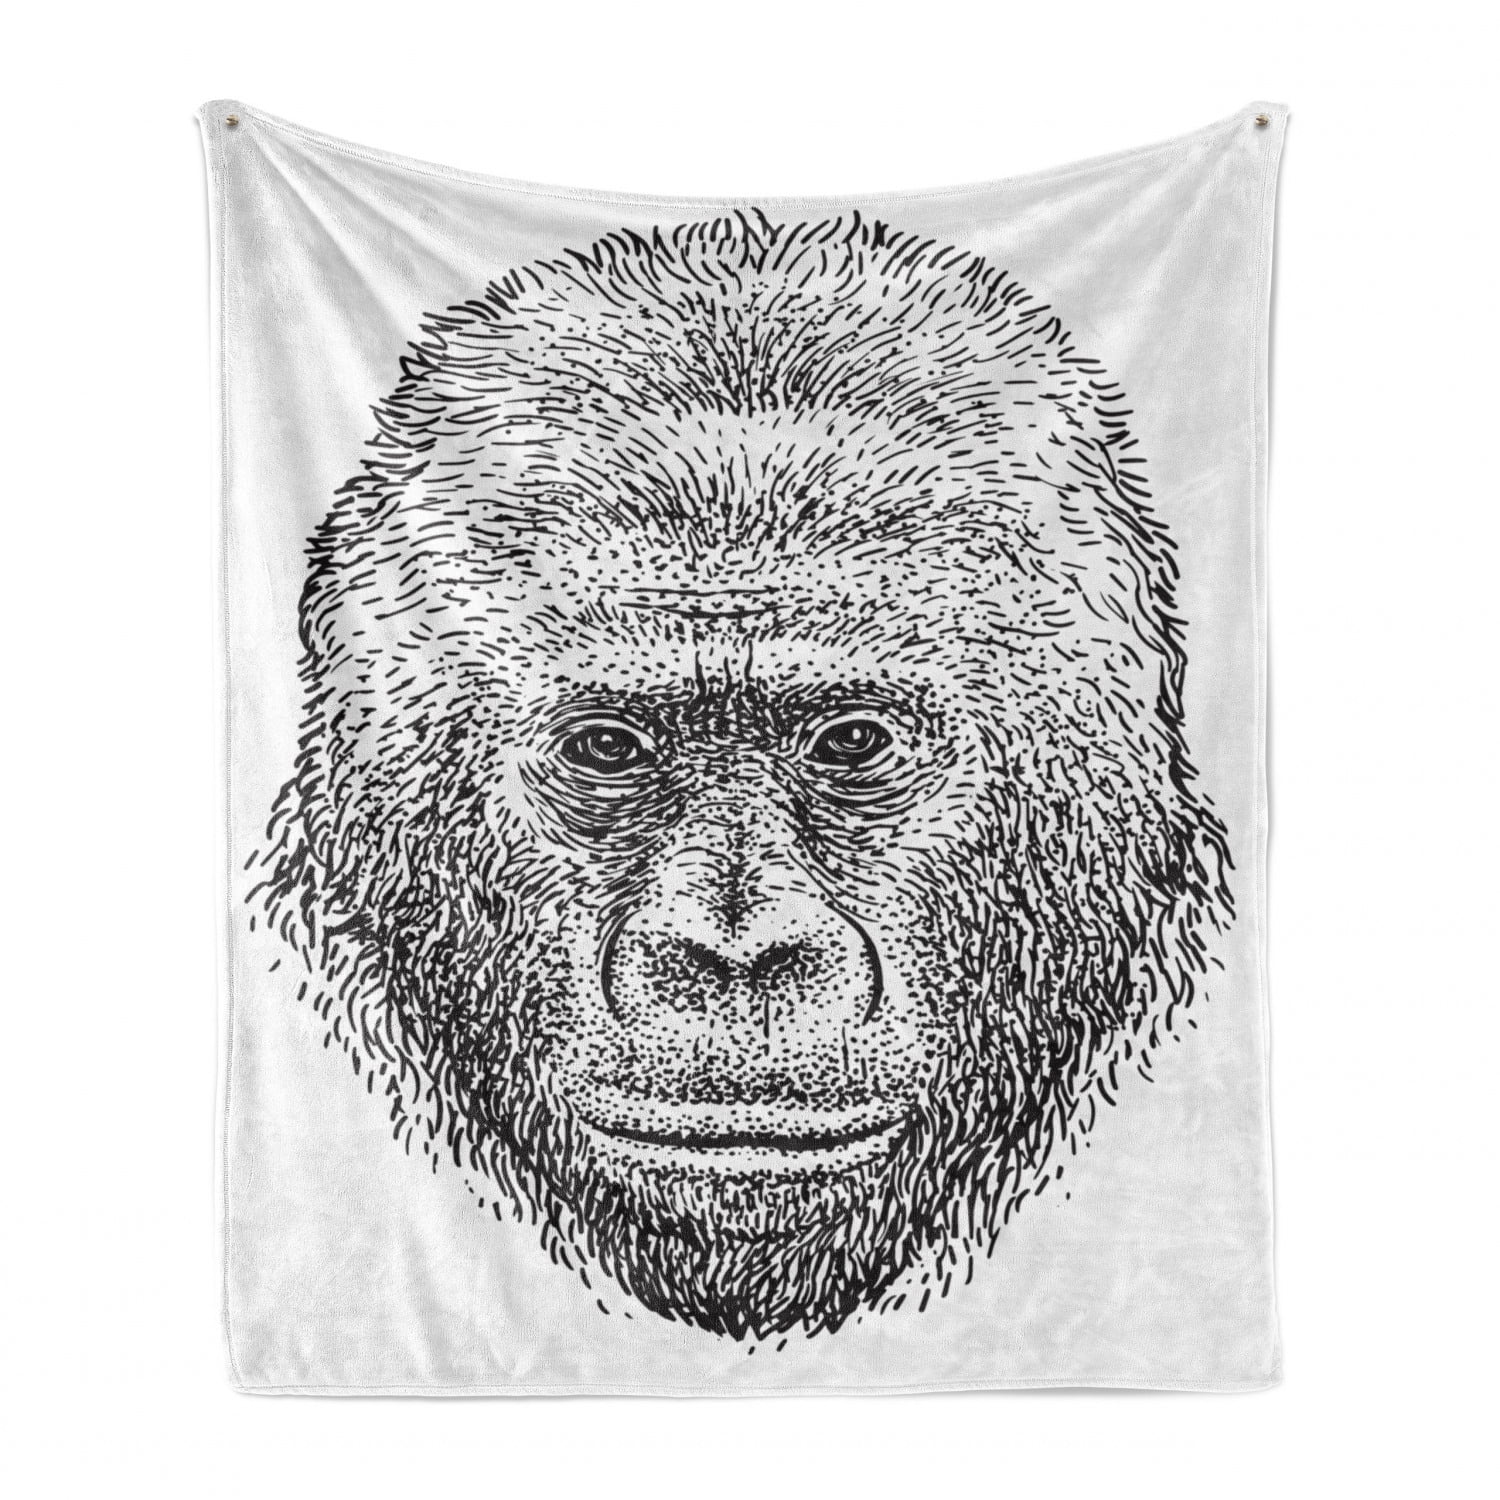 70 x 90 Close up Gorilla Portrait with Orange Eyes Zoo Jungle Animal Wild Money Graphic Ambesonne Modern Throw Blanket Grey Marigold Flannel Fleece Accent Piece Soft Couch Cover for Adults